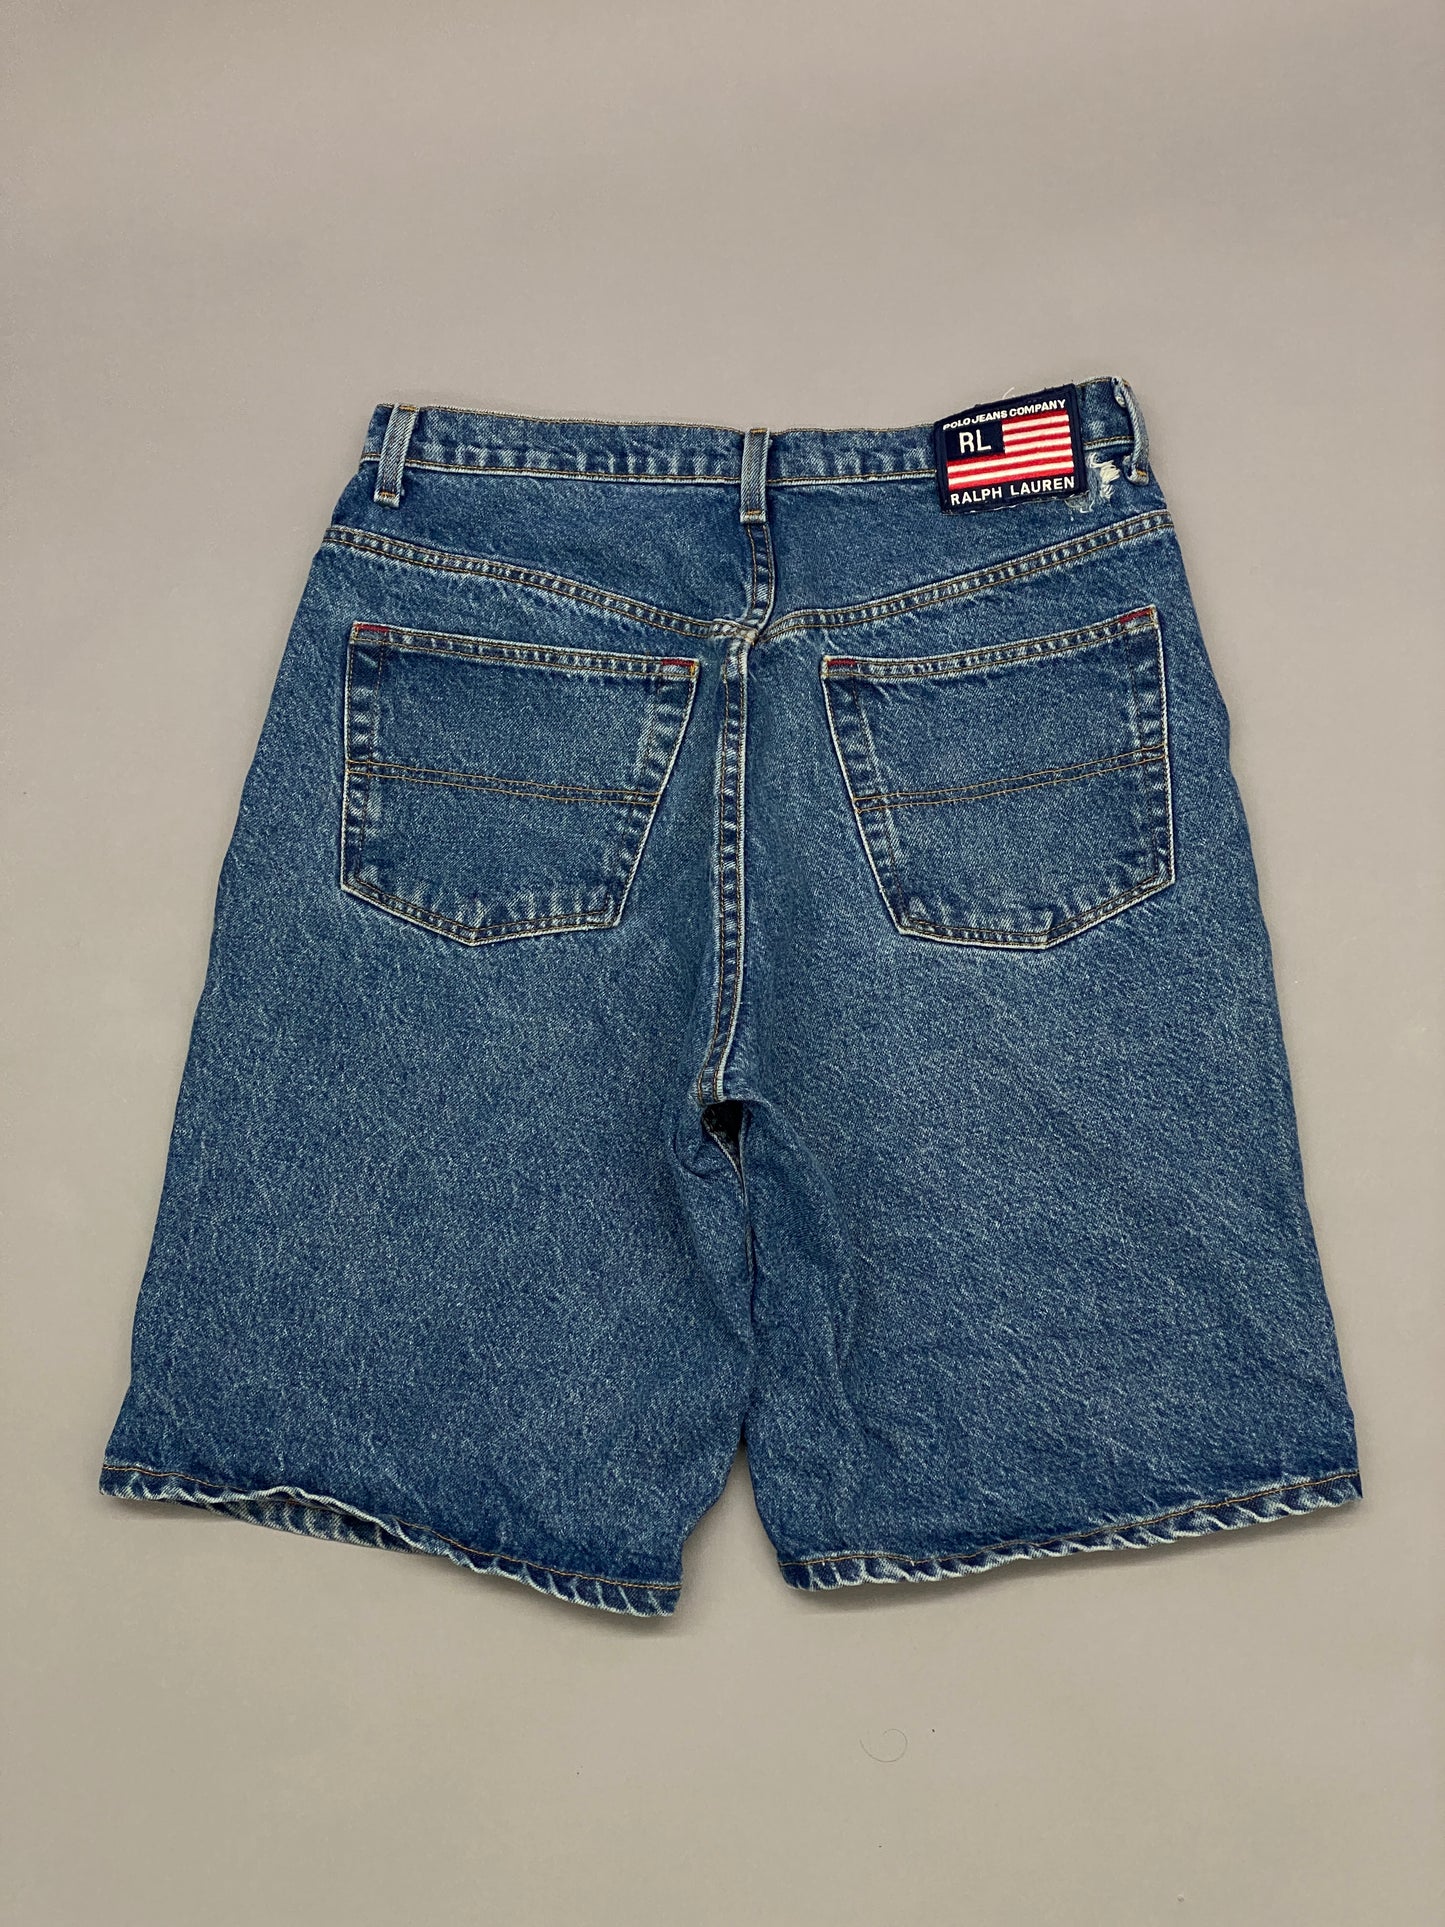 Polo Jeans Vintage Shorts - 32